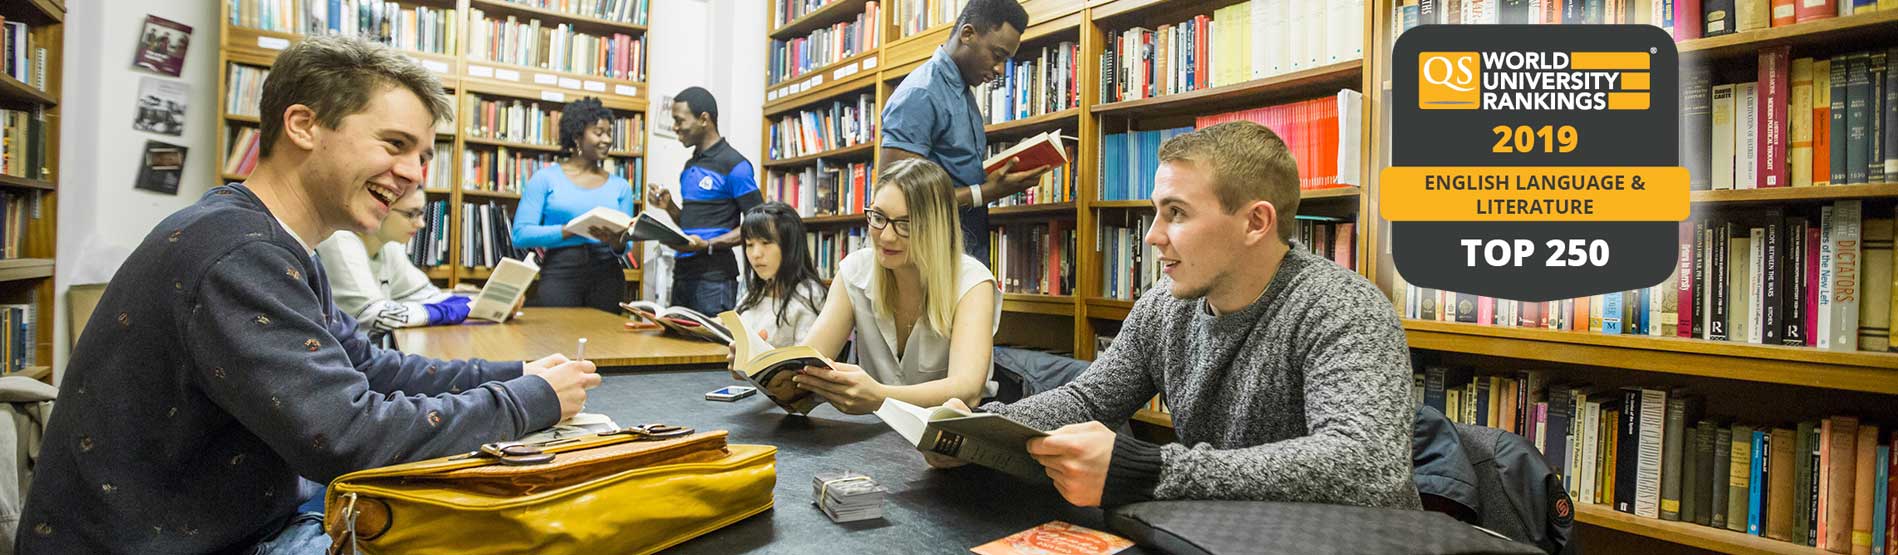 An image of students in the library